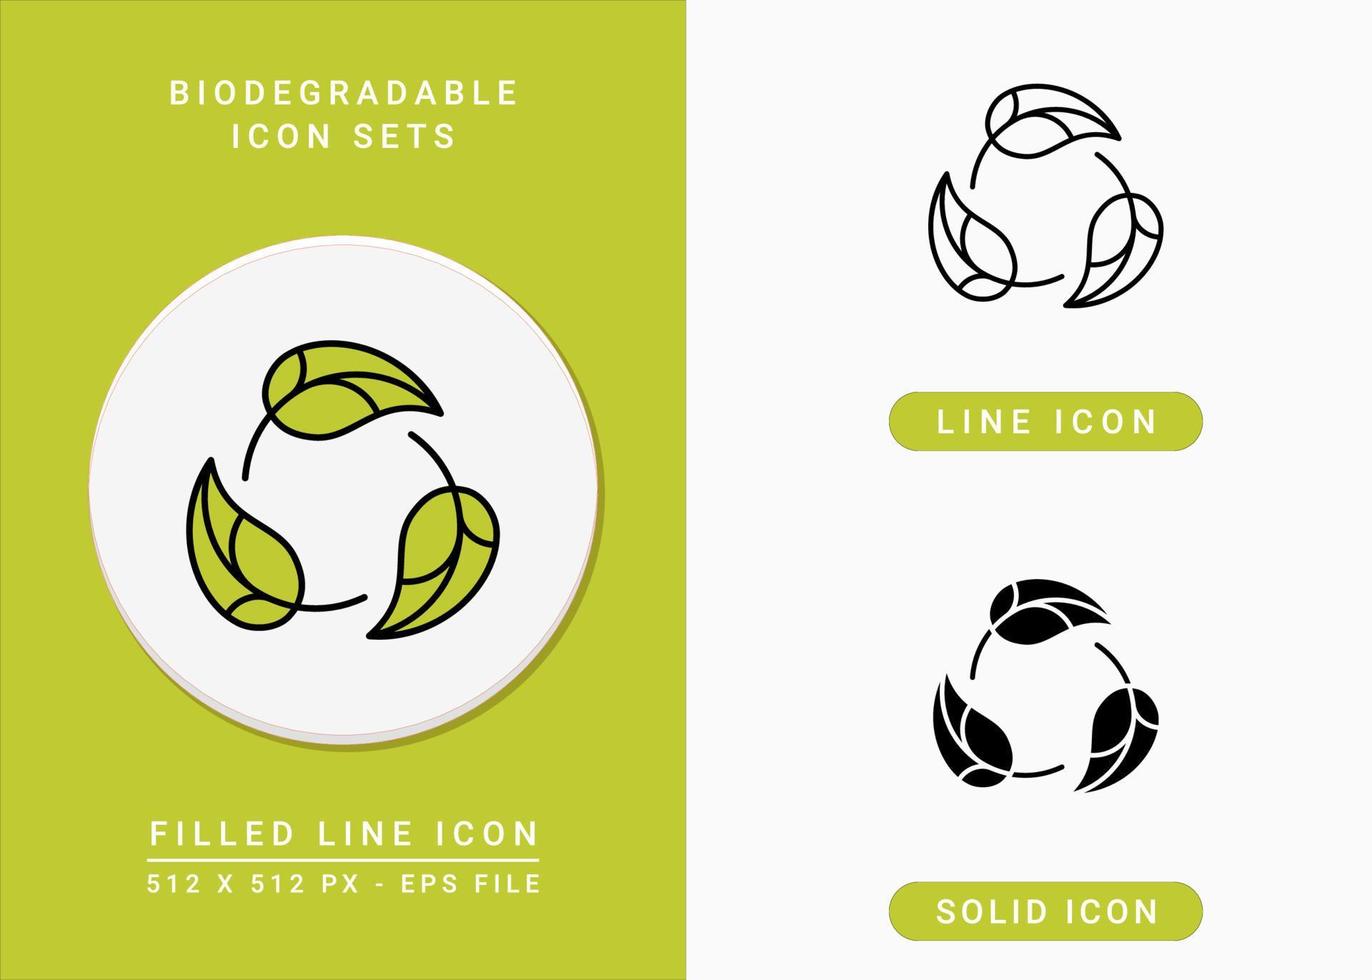 Biodegradable icons set vector illustration with solid icon line style. Recycle leaf concept. Editable stroke icon on isolated background for web design, infographic and UI mobile app.